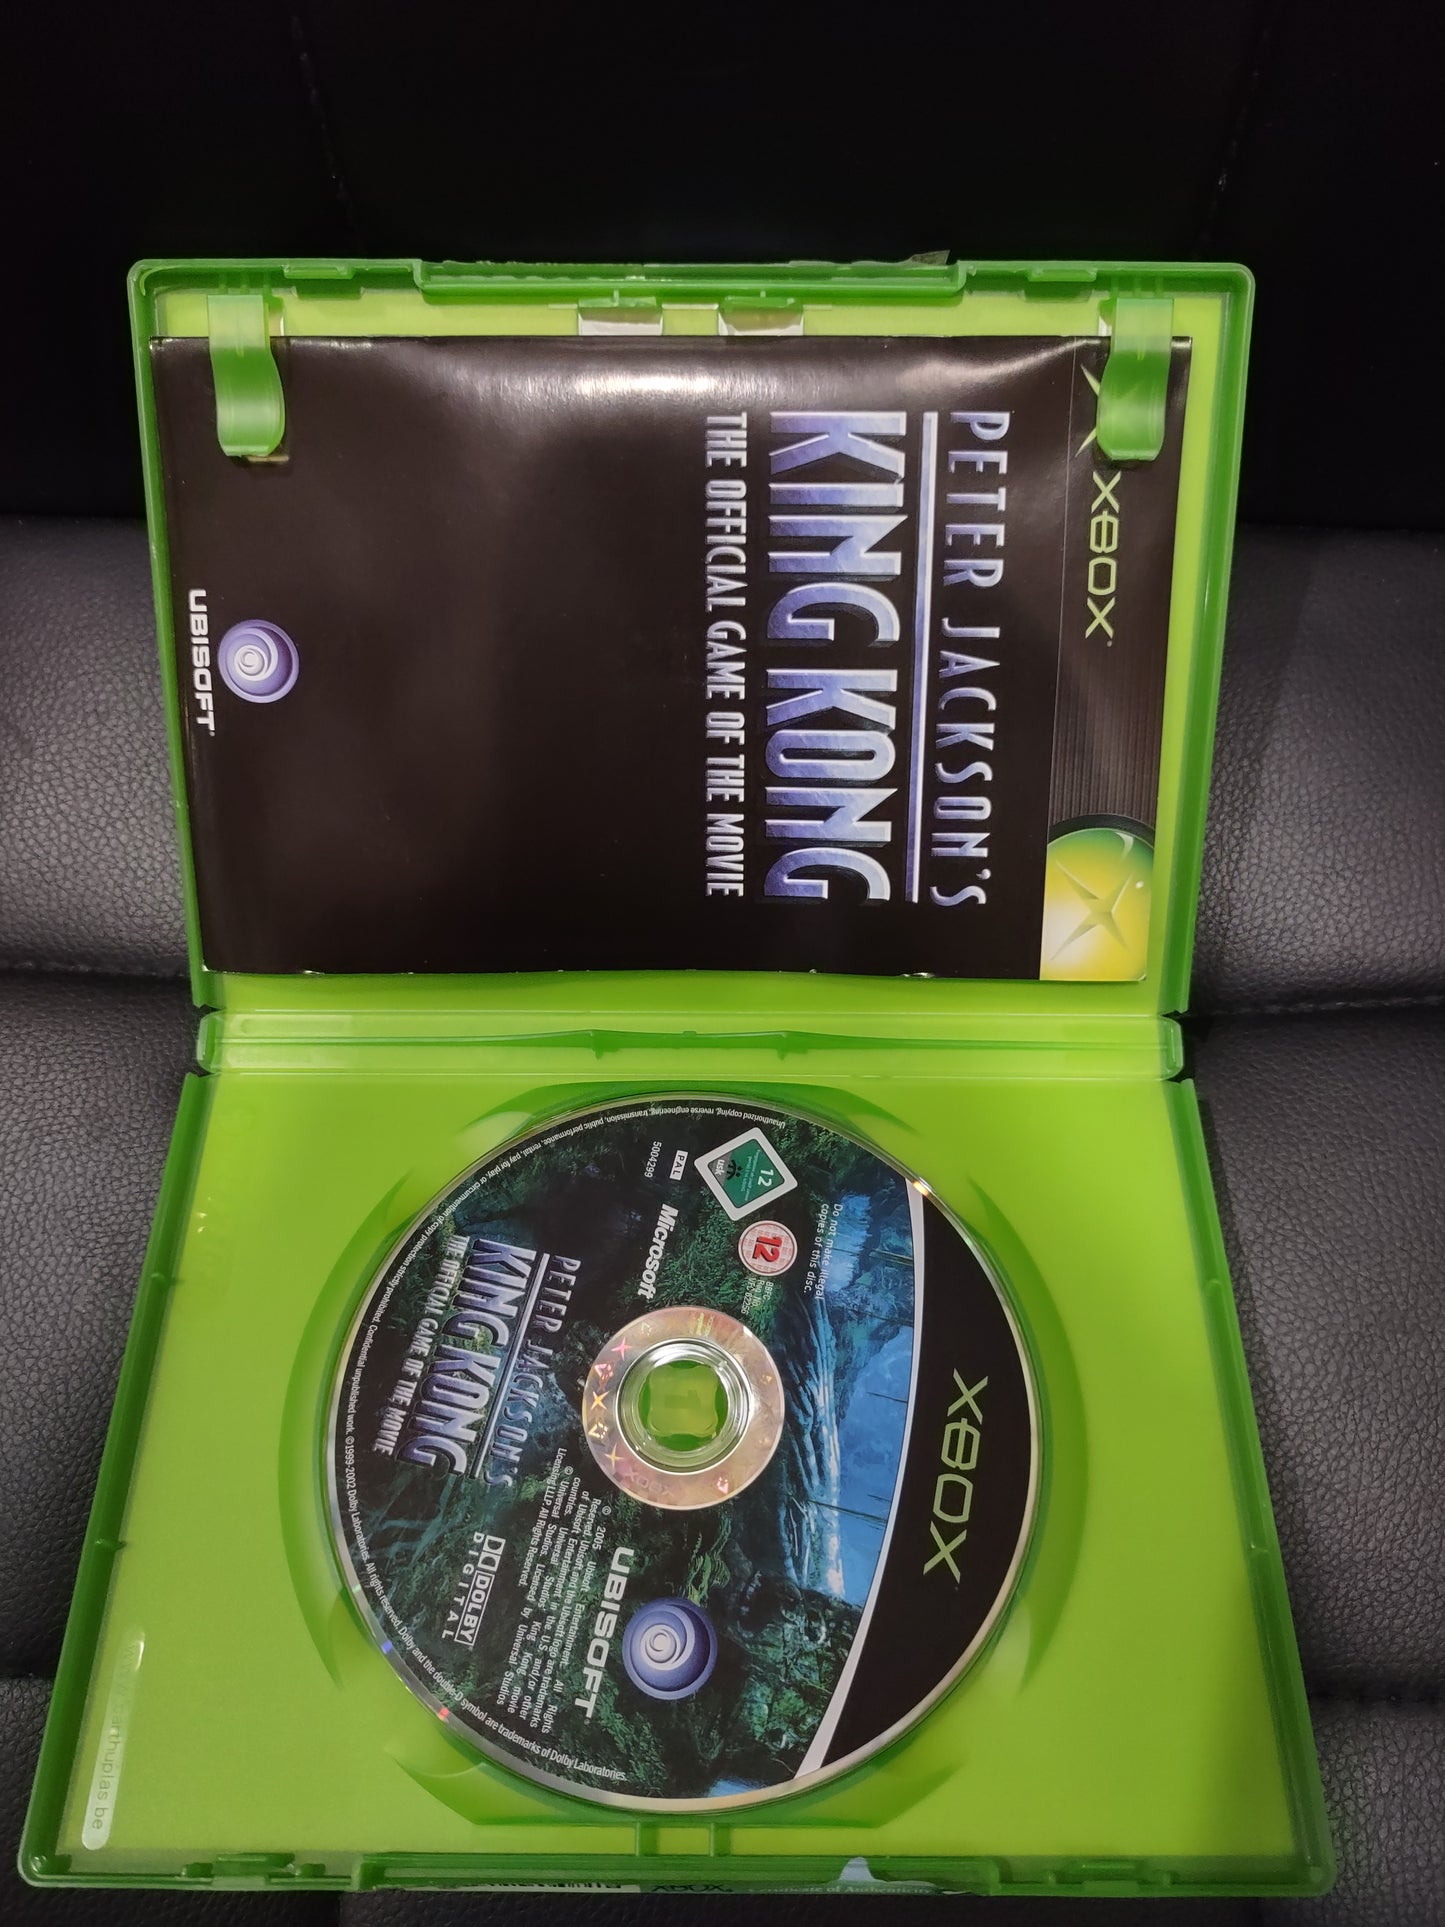 Gioco Xbox Peter jackson's King Kong the official game of the movie italiano